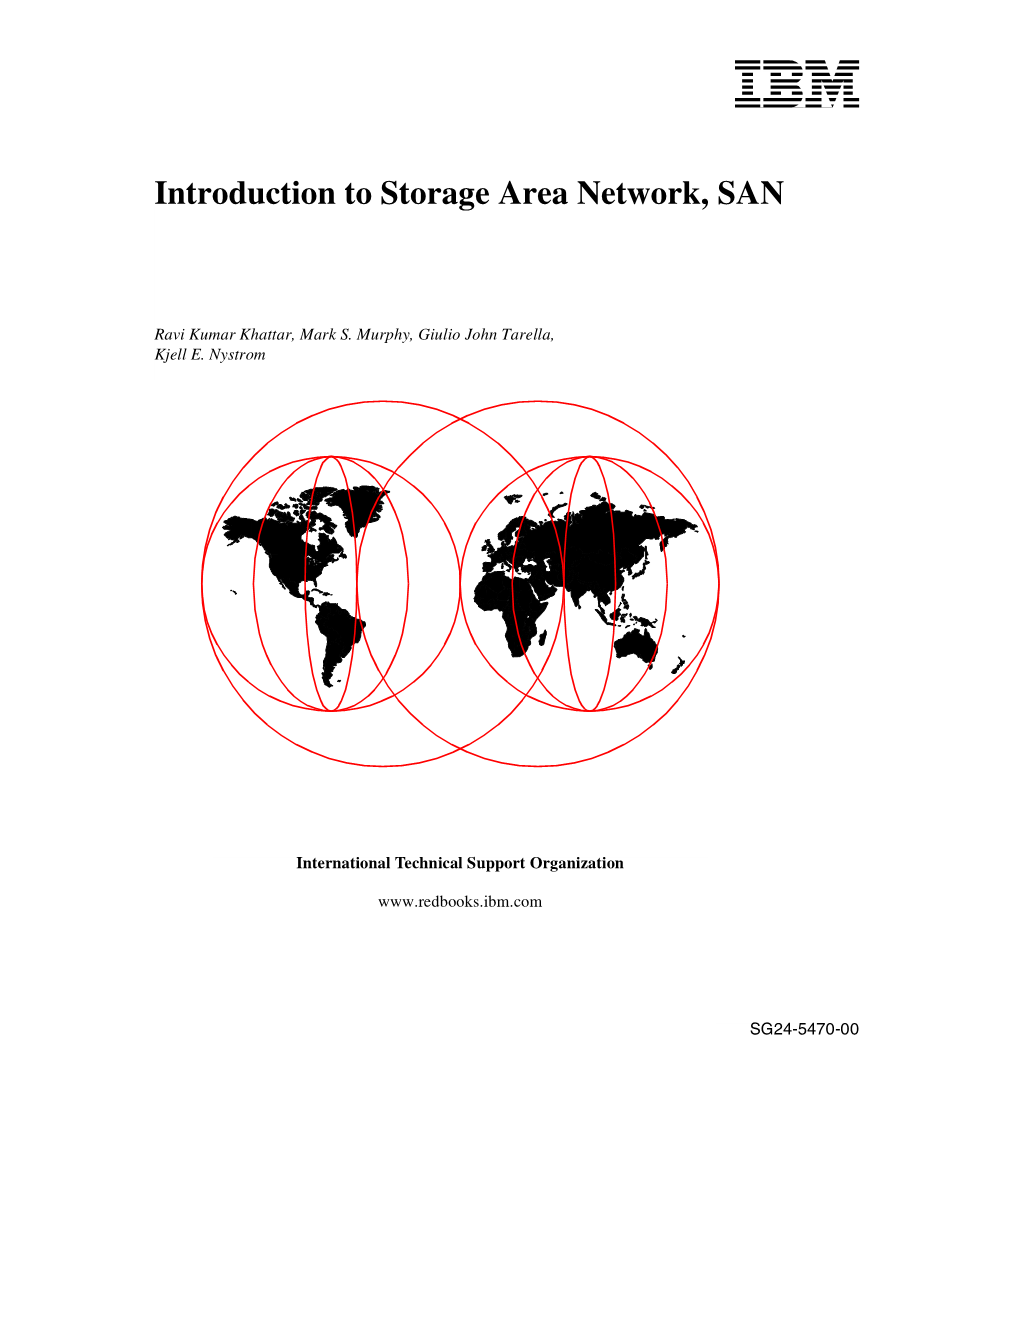 Introduction to Storage Area Network, SAN